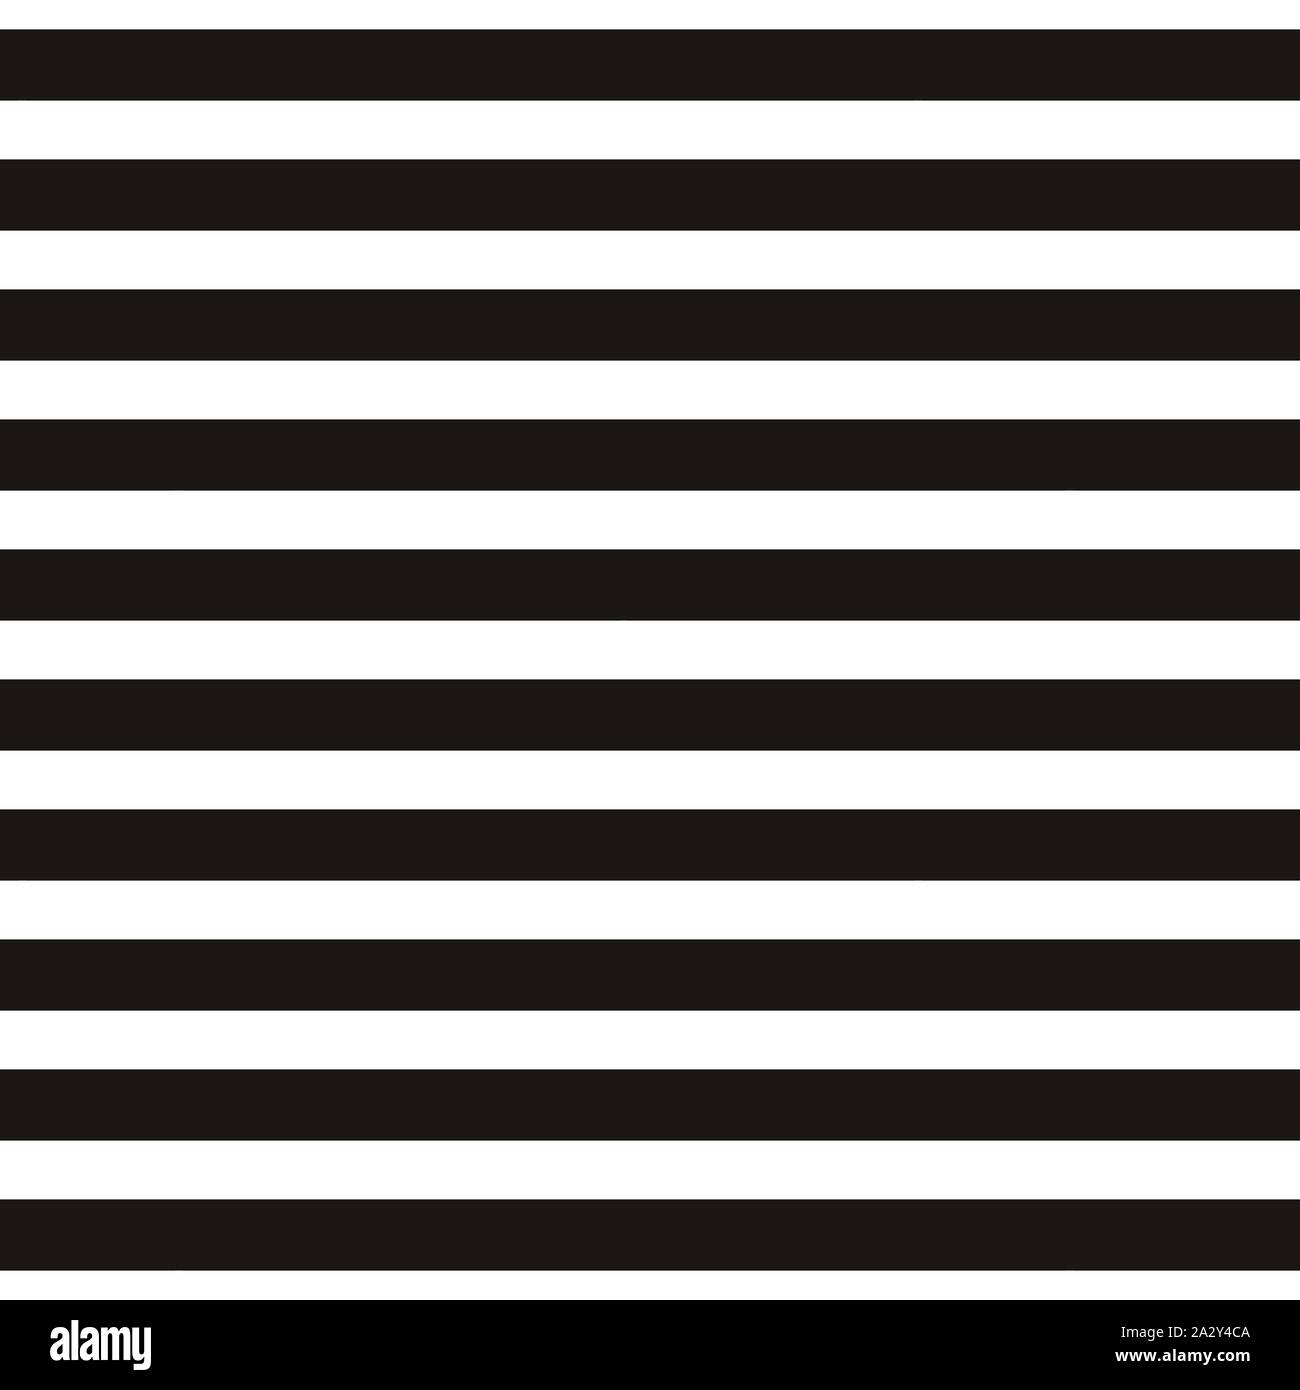 Striped seamless pattern with horizontal line. Black and white fashion graphics design. Strict graphic background. Retro style. Template for wallpaper, wrapping, textile, fabric. Vector Illustration. Stock Vector